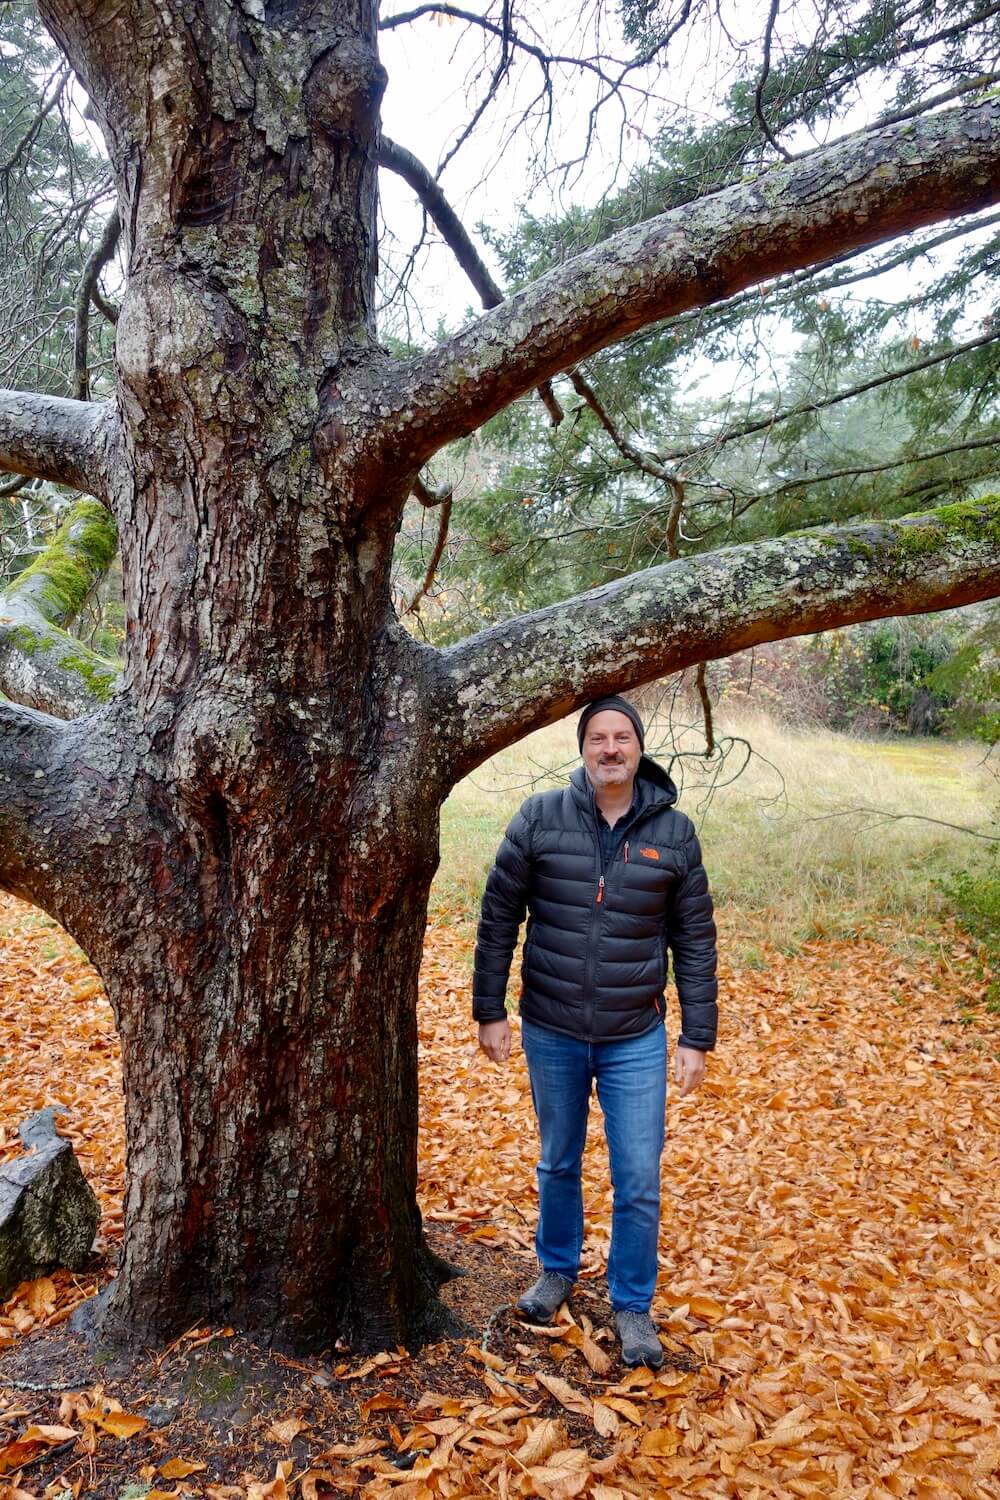 Matthew Kessi poses for a photo standing under a large tree. He is just the height of the first thick branch on the tree. His feet are surrounded by hundreds of bright orange leaves. This Fall scene is flavored by a damp tone of moss and gray rainy skies.